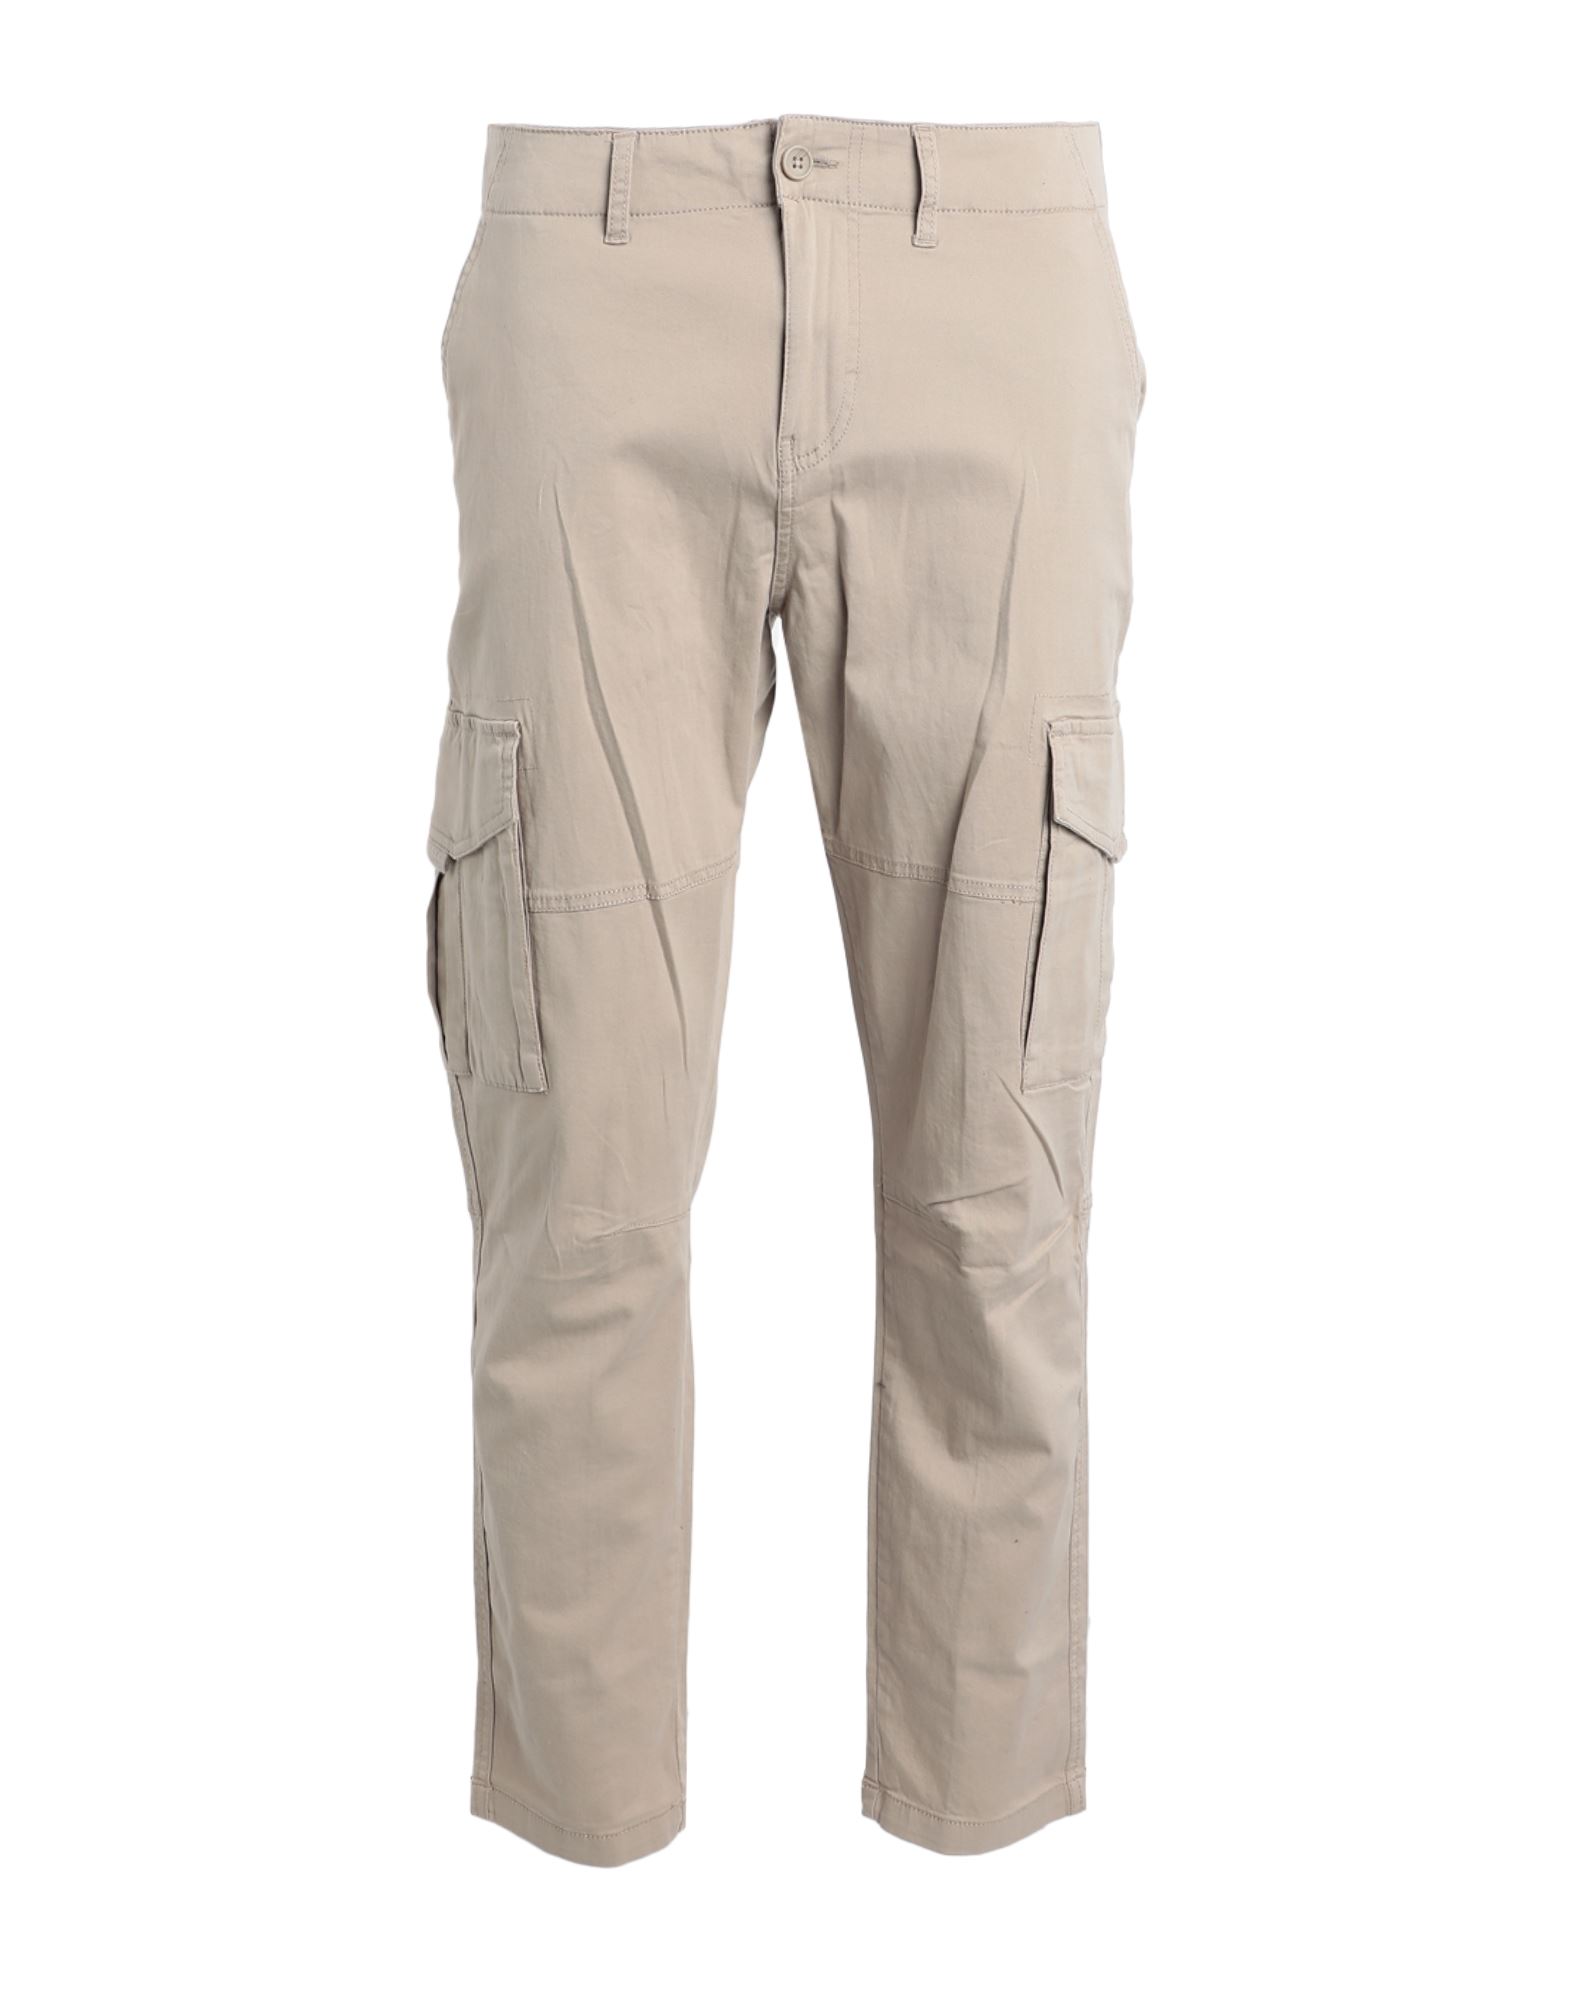 Only & Sons Man Pants Beige Size 30w-32l Cotton, Recycled Cotton, Elastane